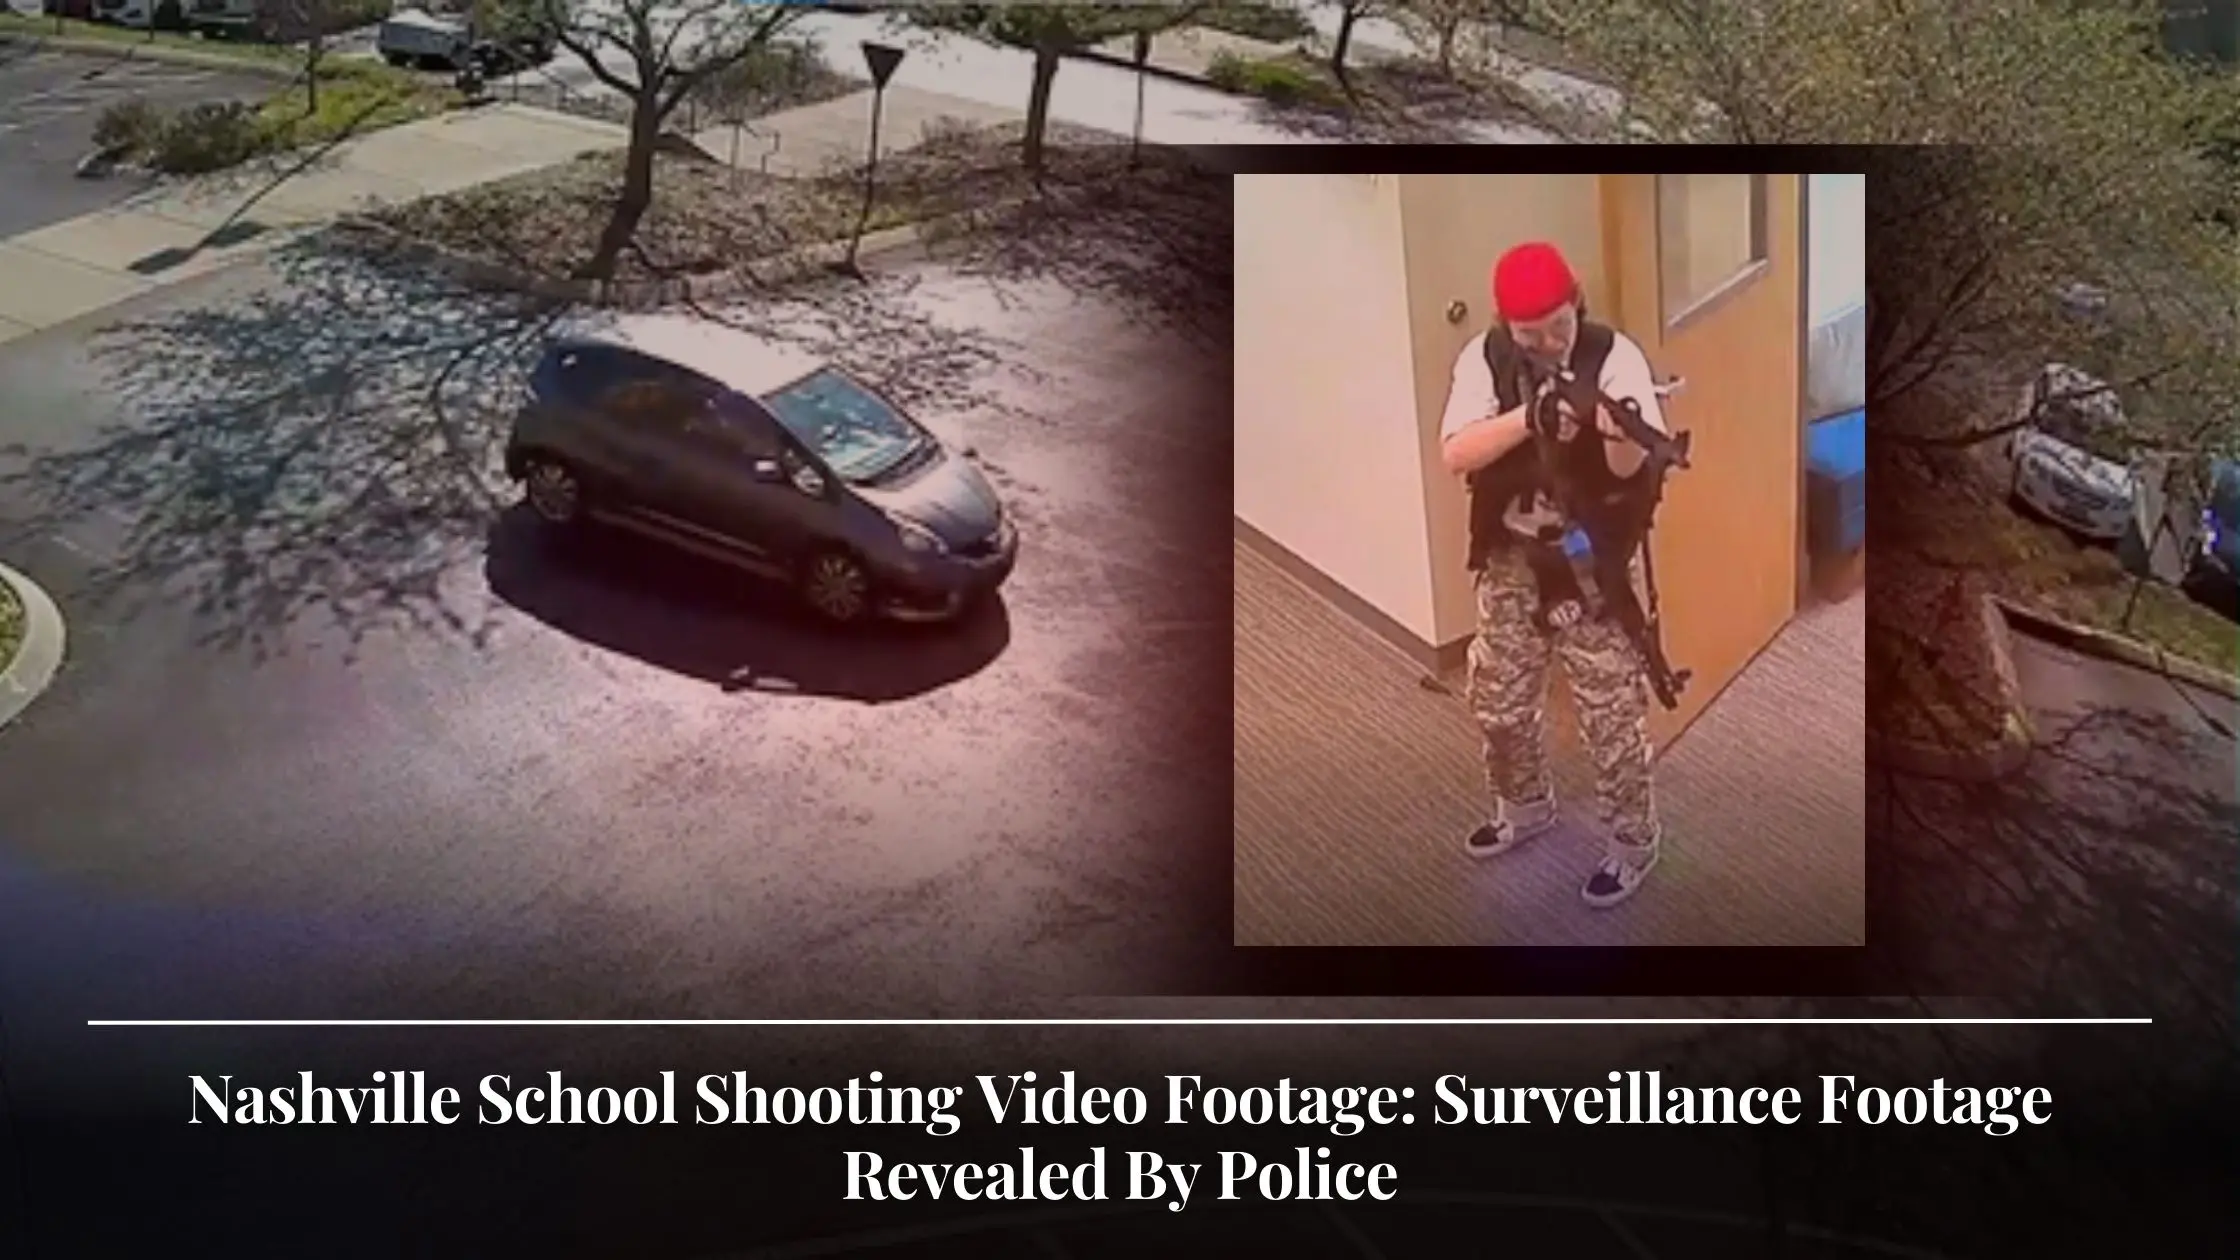 Nashville School Shooting Video Footage Surveillance Footage Revealed By Police